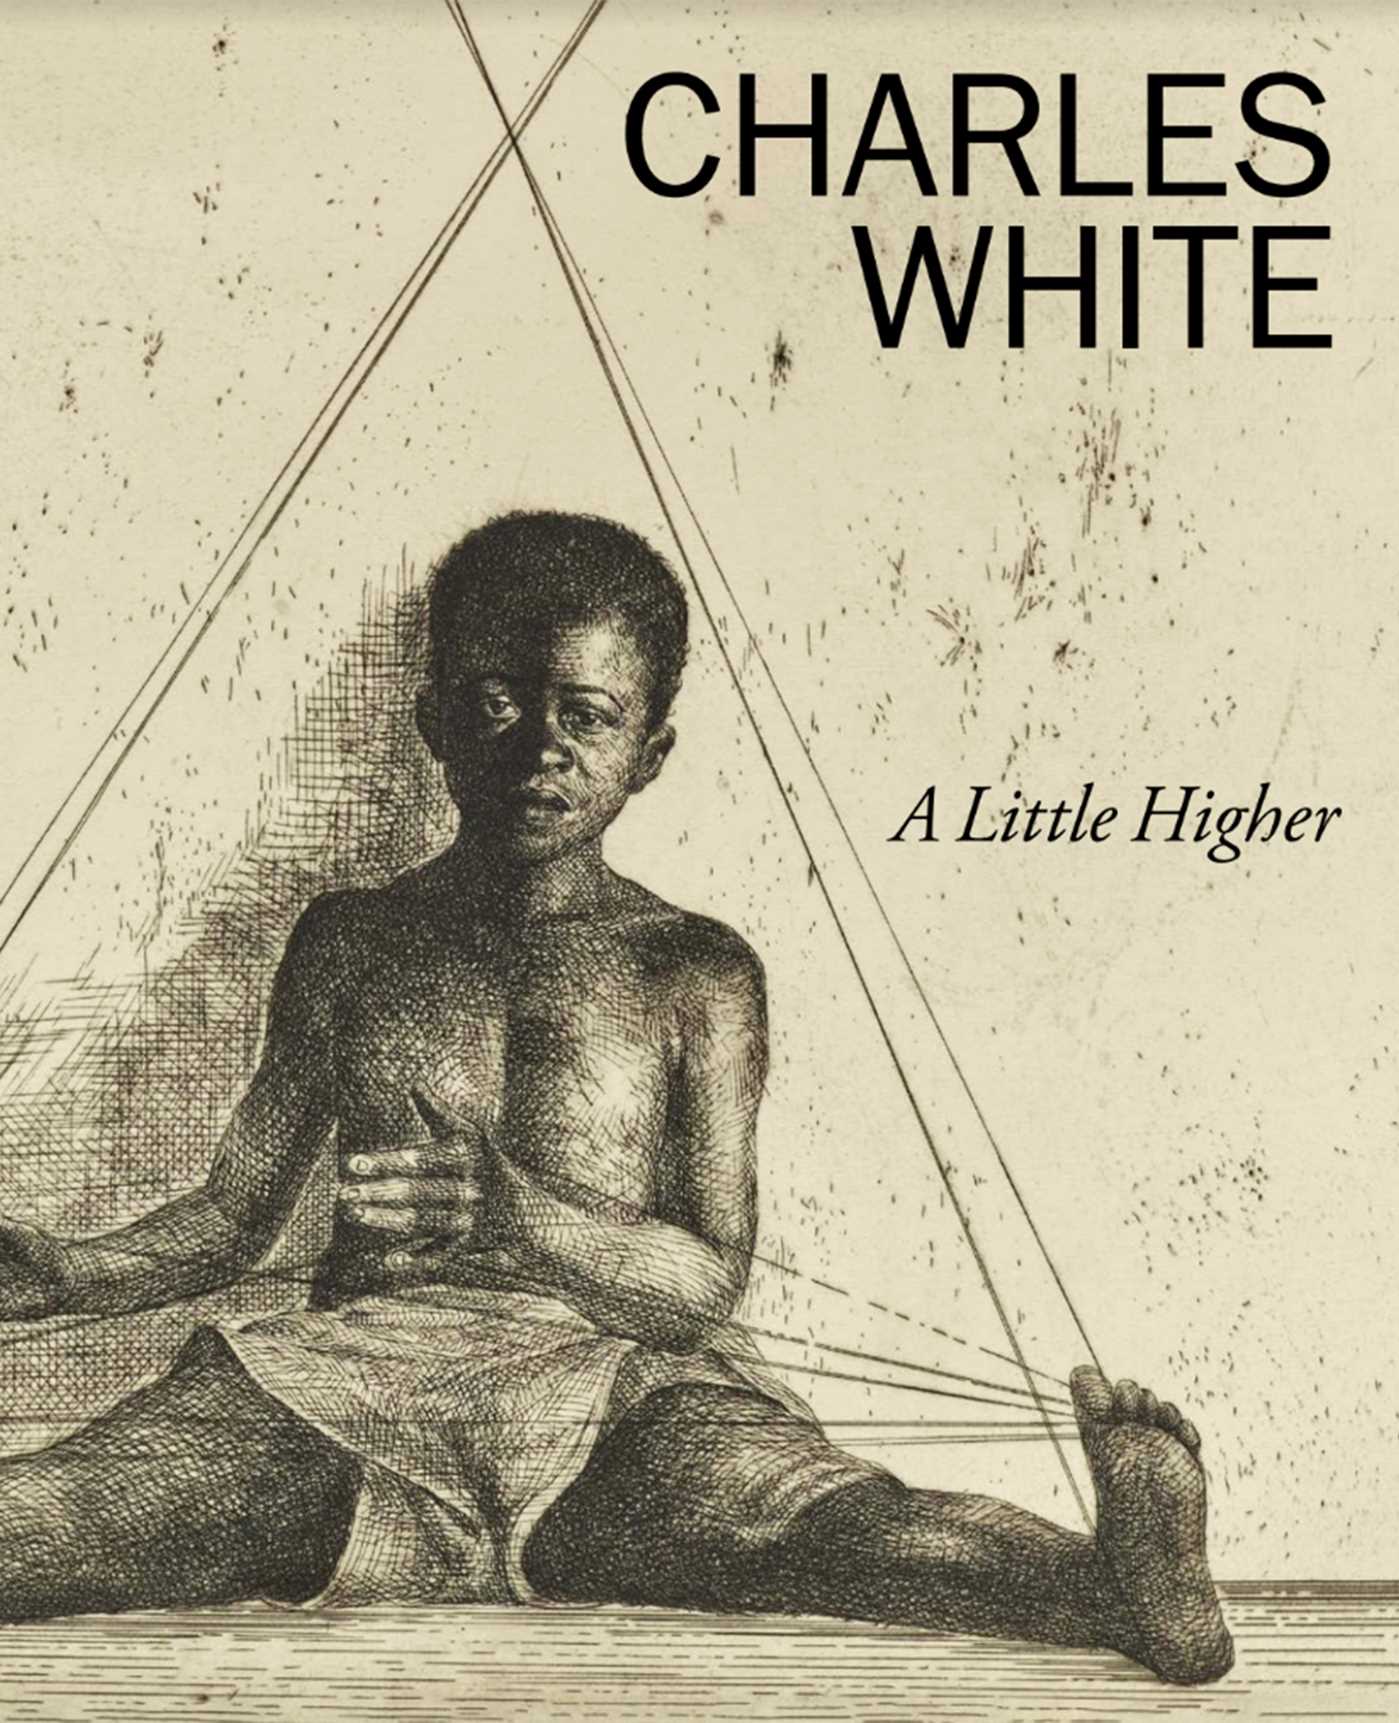 Charles White: A Little Higher | Lowe Art Museum